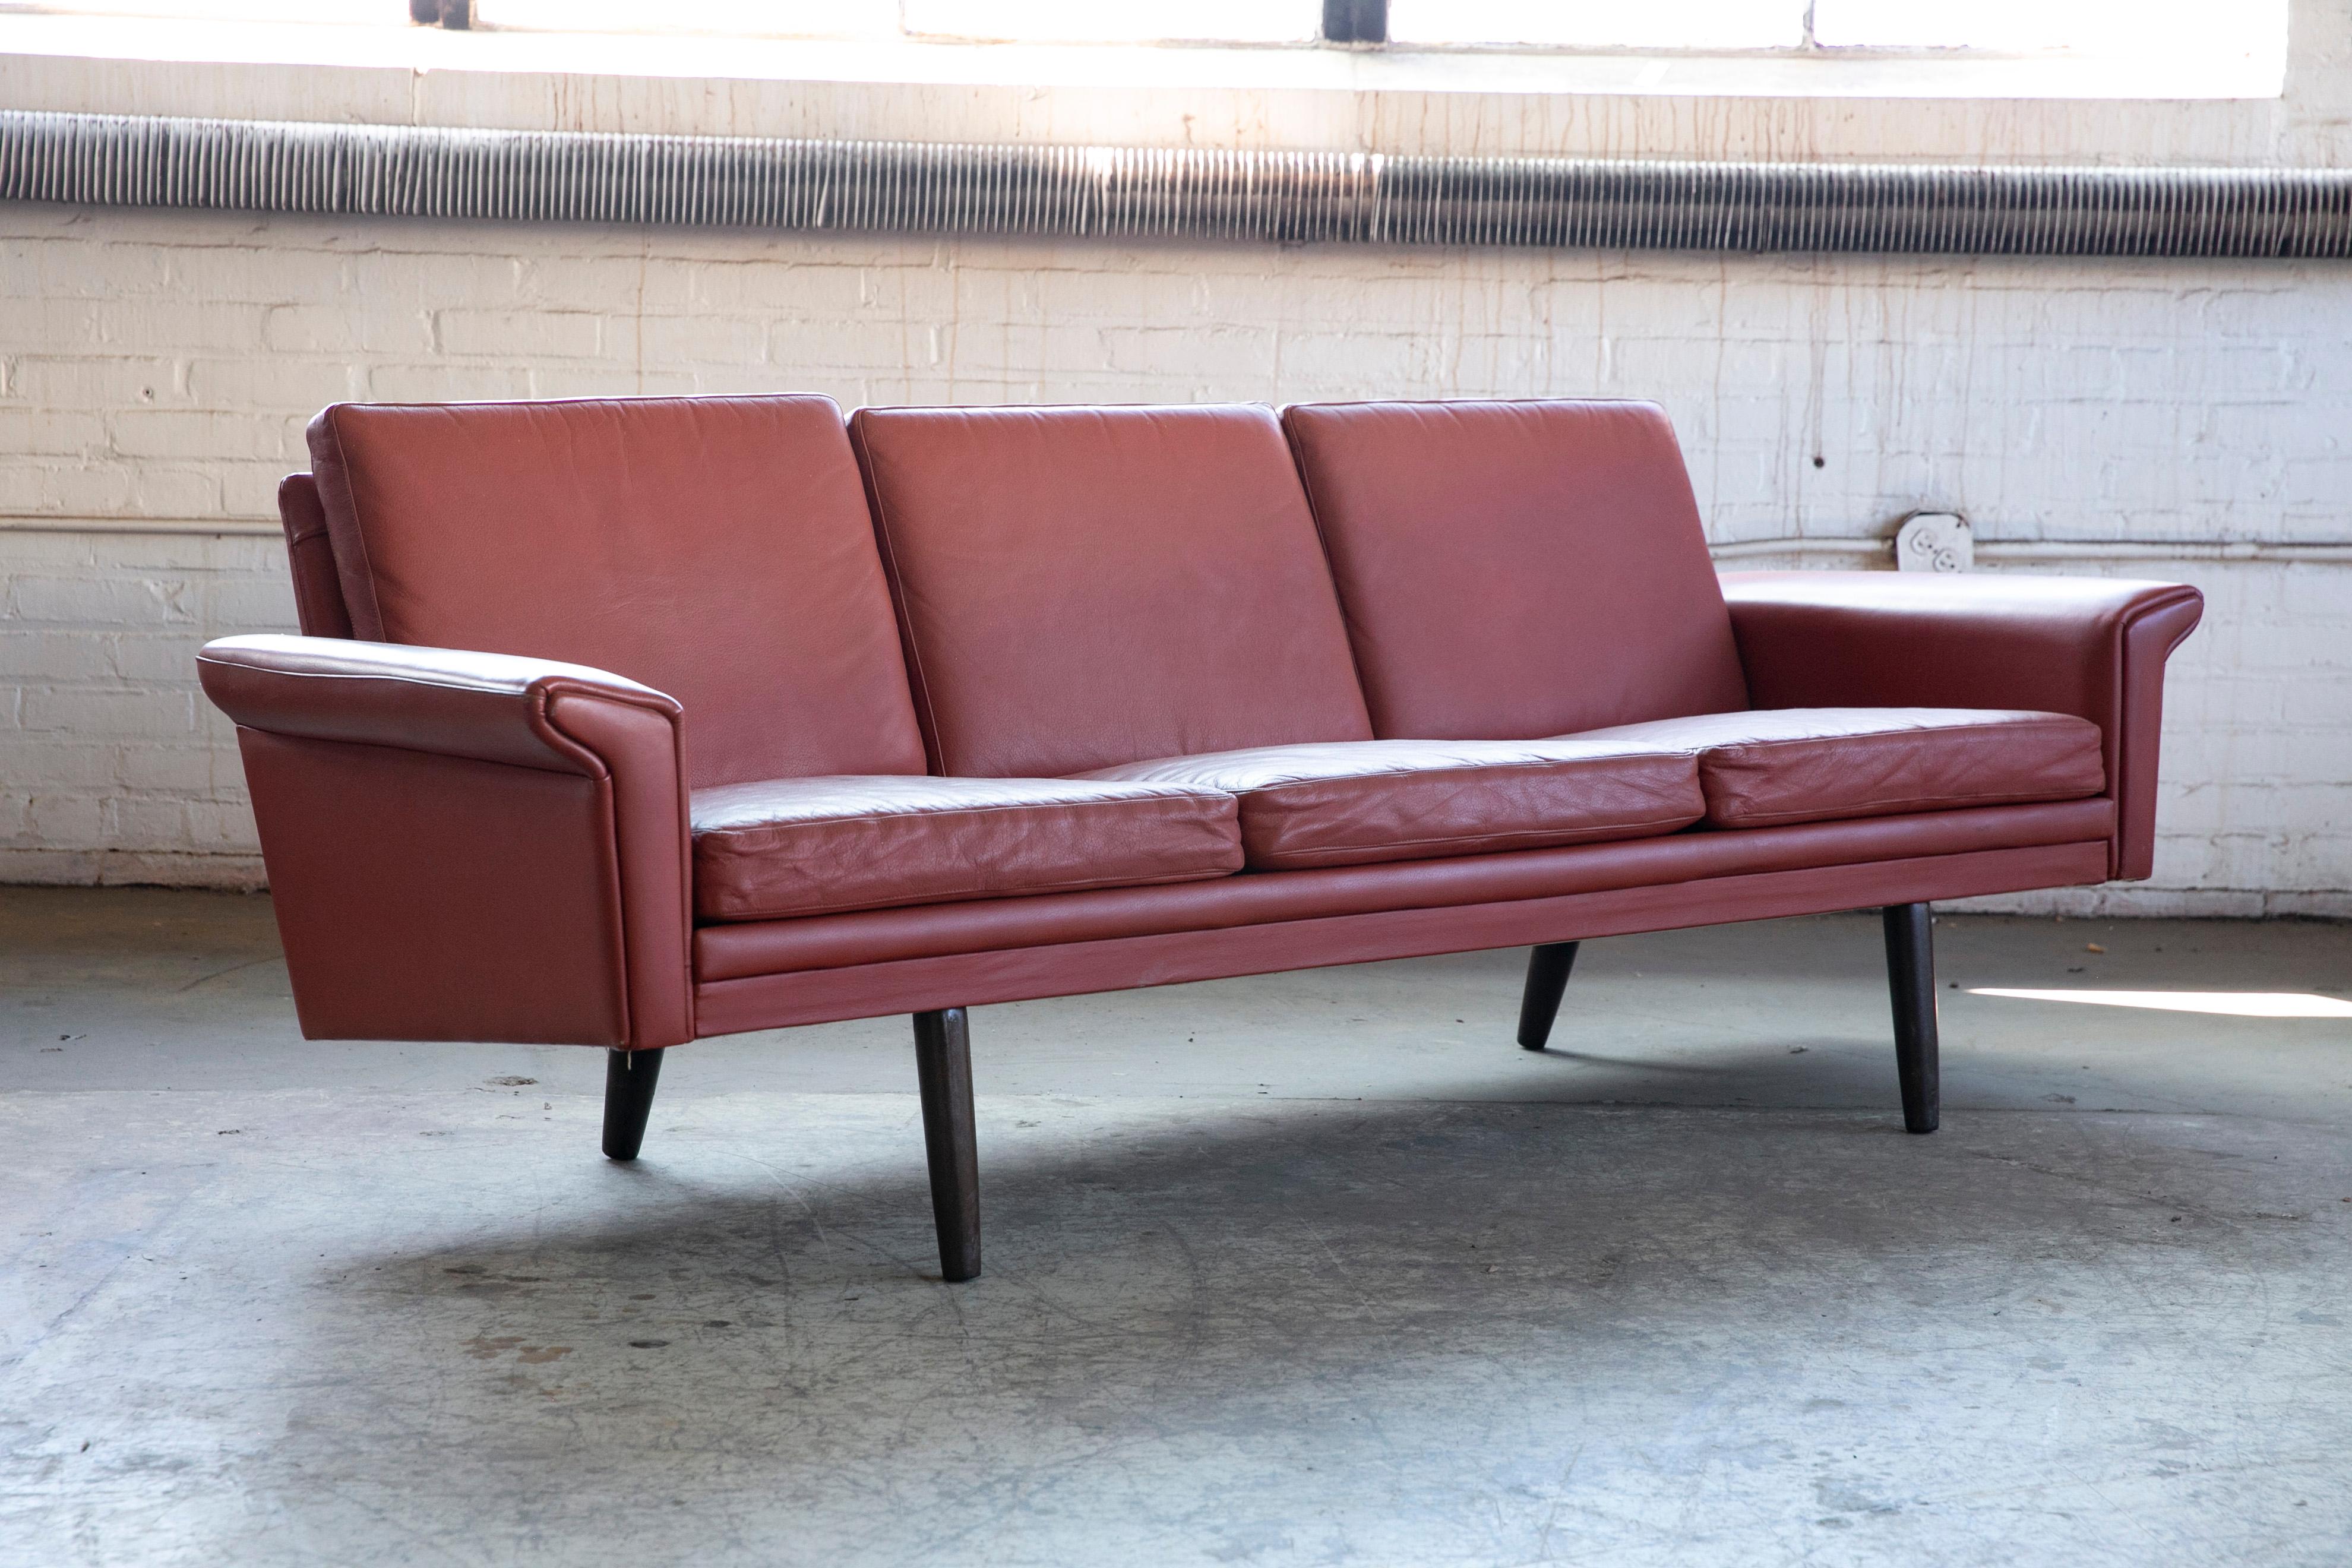 Classic Danish Mid-Century Sofa in Rust Red Colored Leather by Georg Thams 3